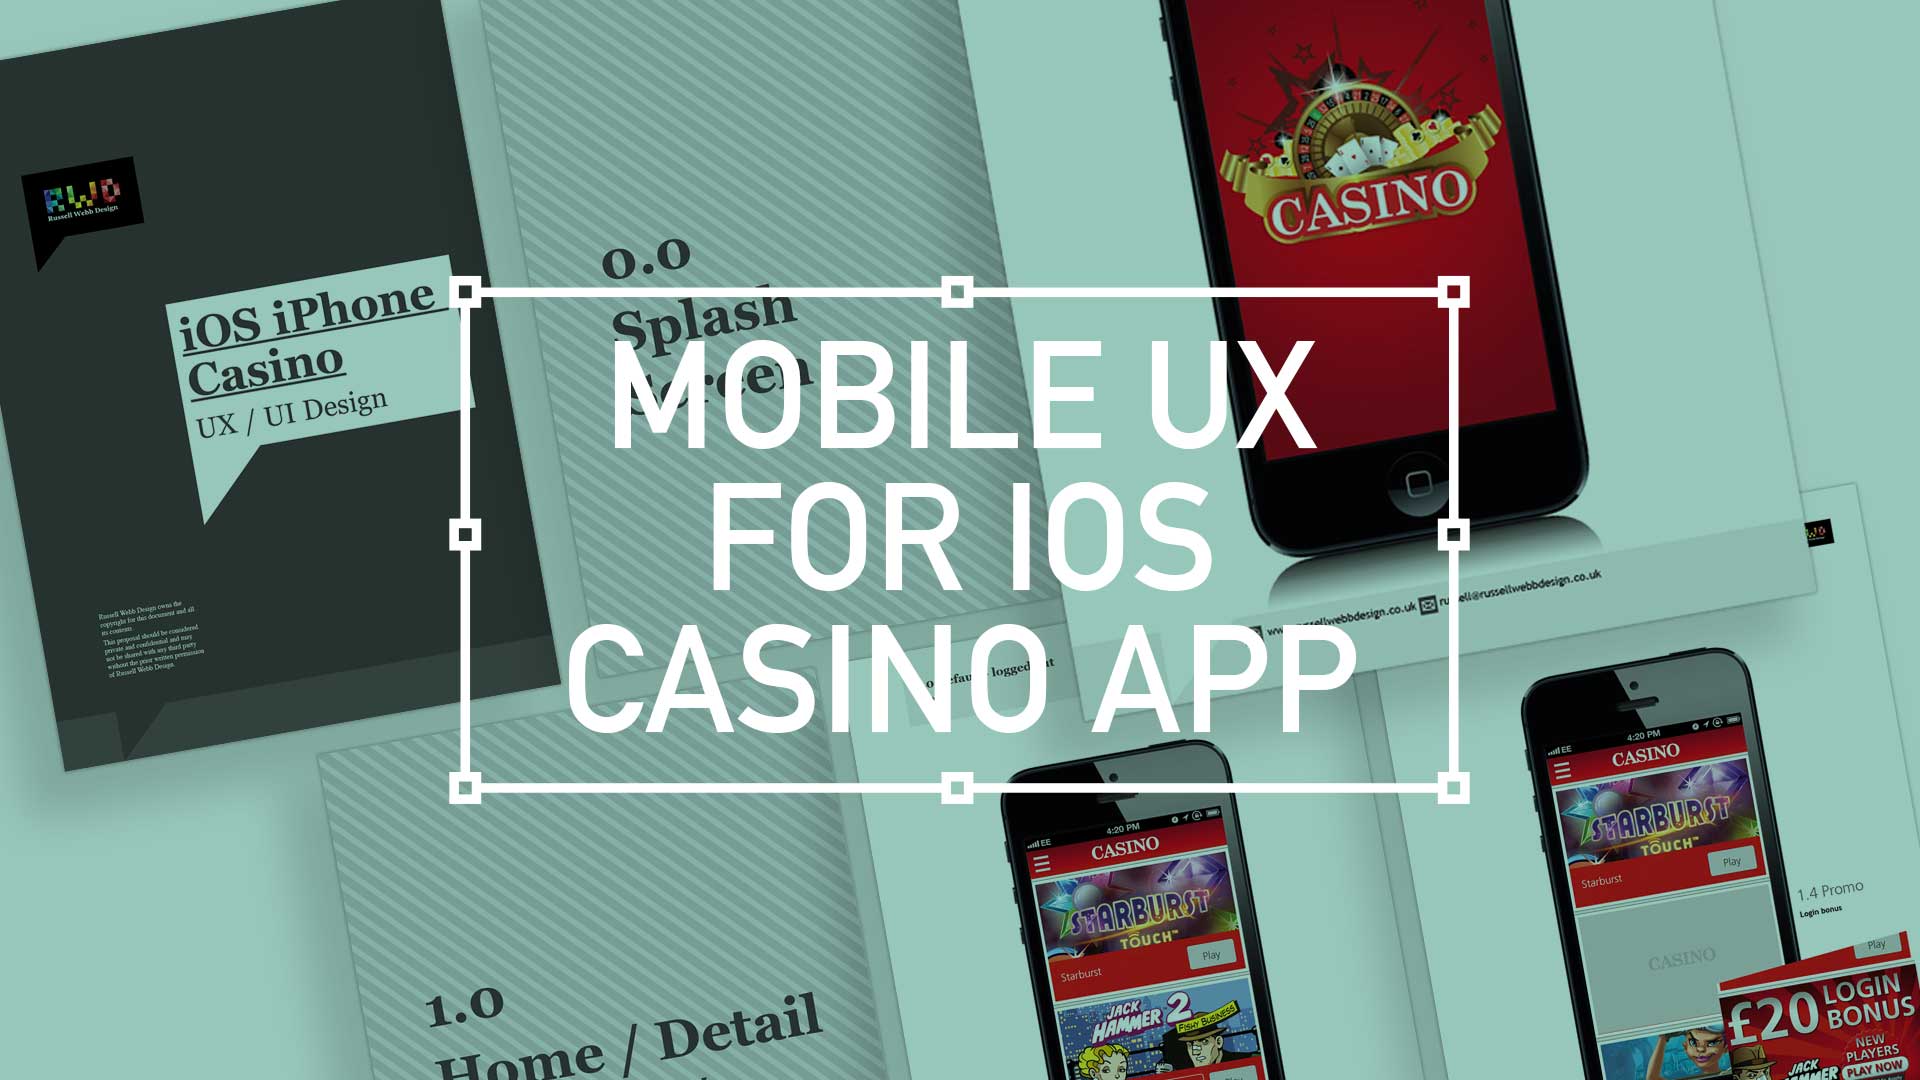 Mobile UX for a iOS Casino App